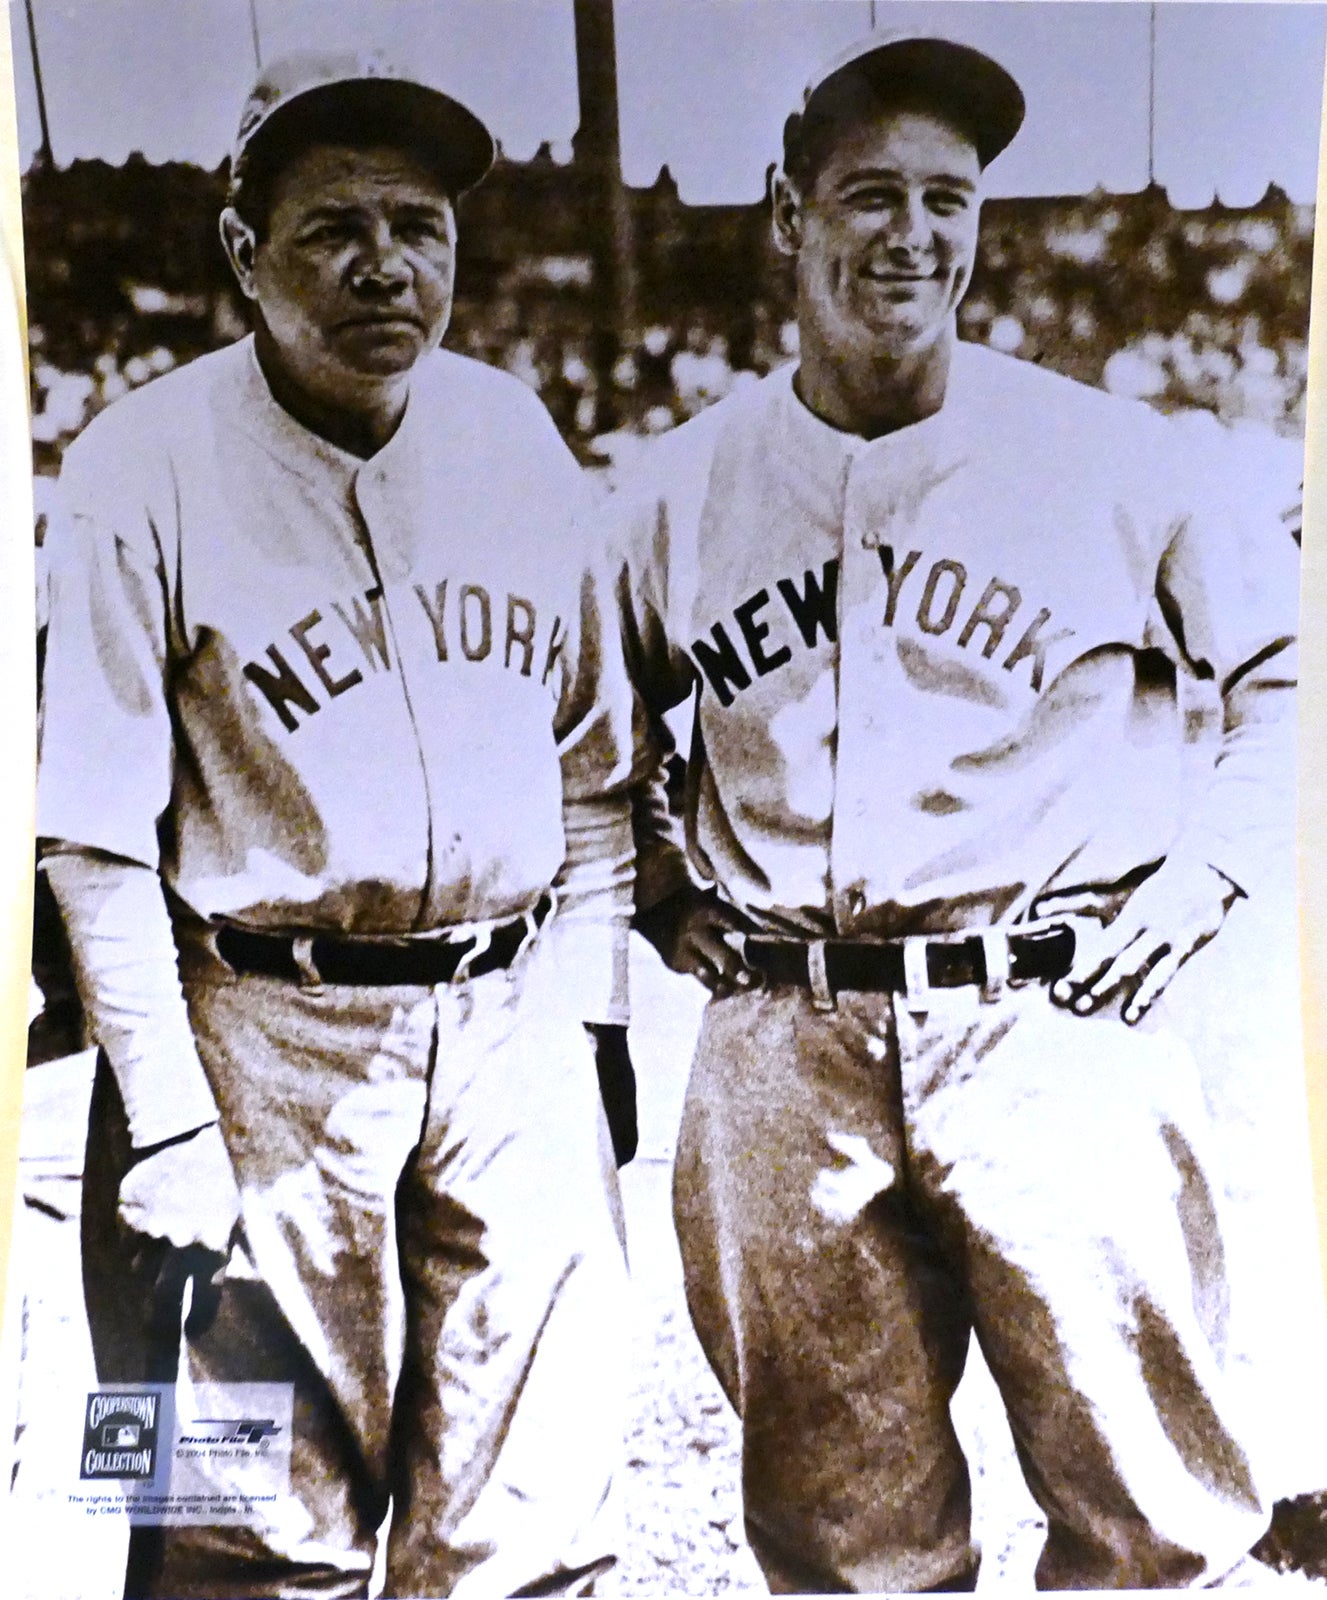 Matted 8x10 Photo- Ruth/Gehrig with Bat